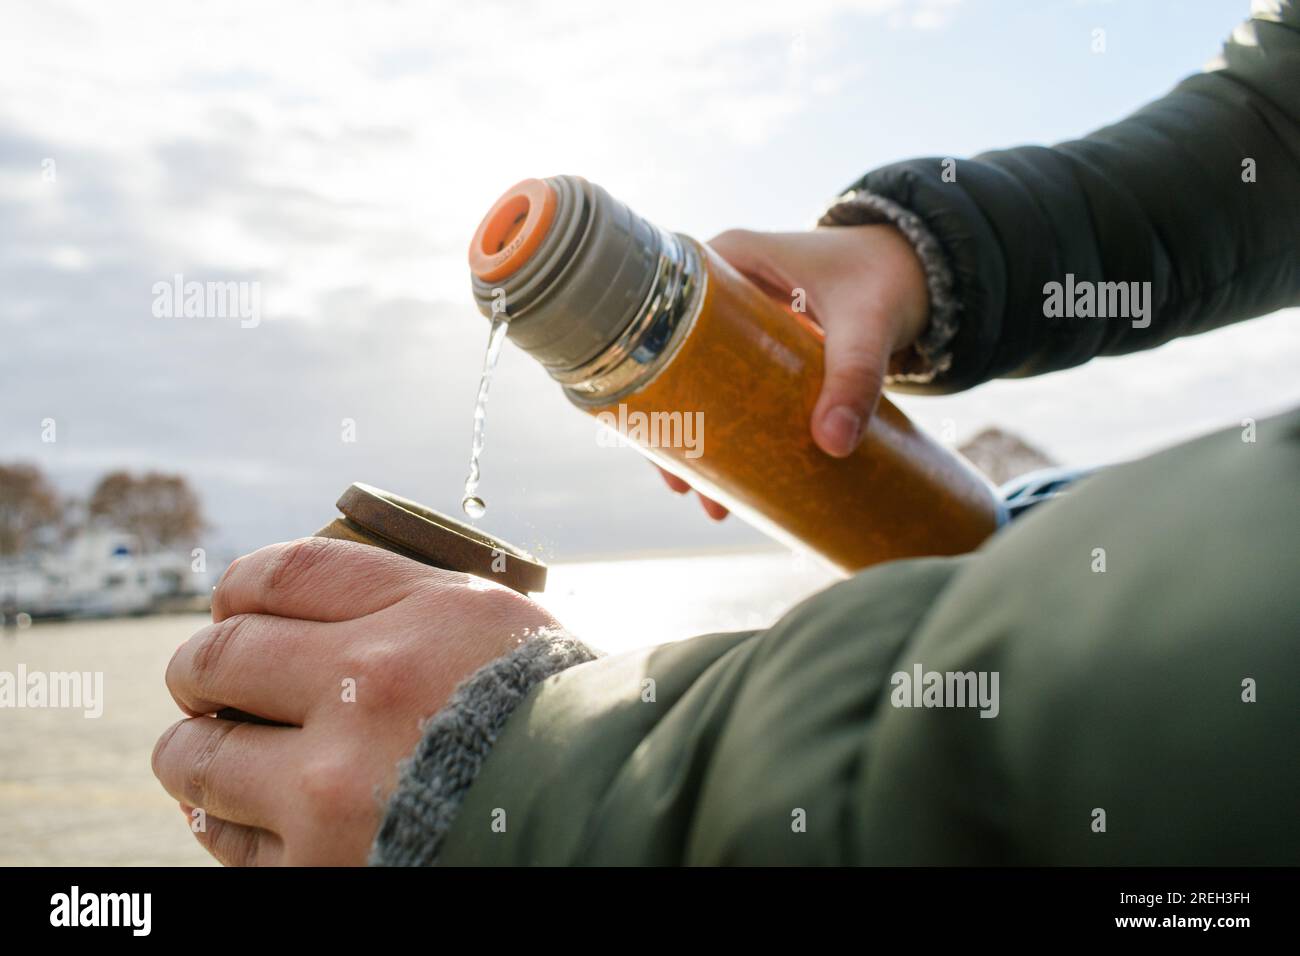 https://c8.alamy.com/comp/2REH3FH/closeup-of-female-caucasian-hands-preparing-mate-outdoors-at-sunrise-with-sky-in-background-and-copy-space-2REH3FH.jpg